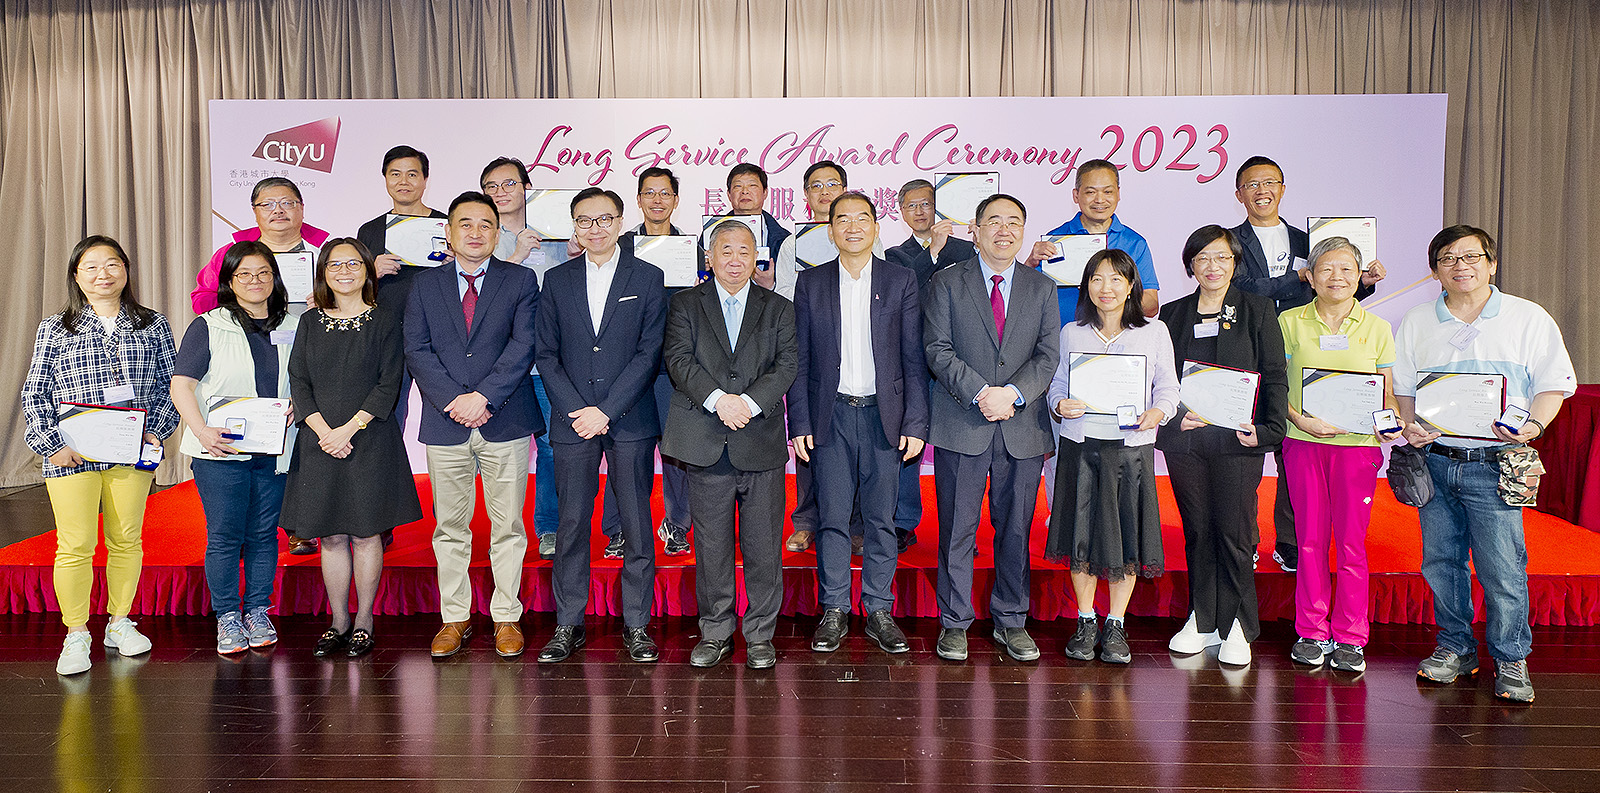 The CityU management took a photo with the long-serving staff.